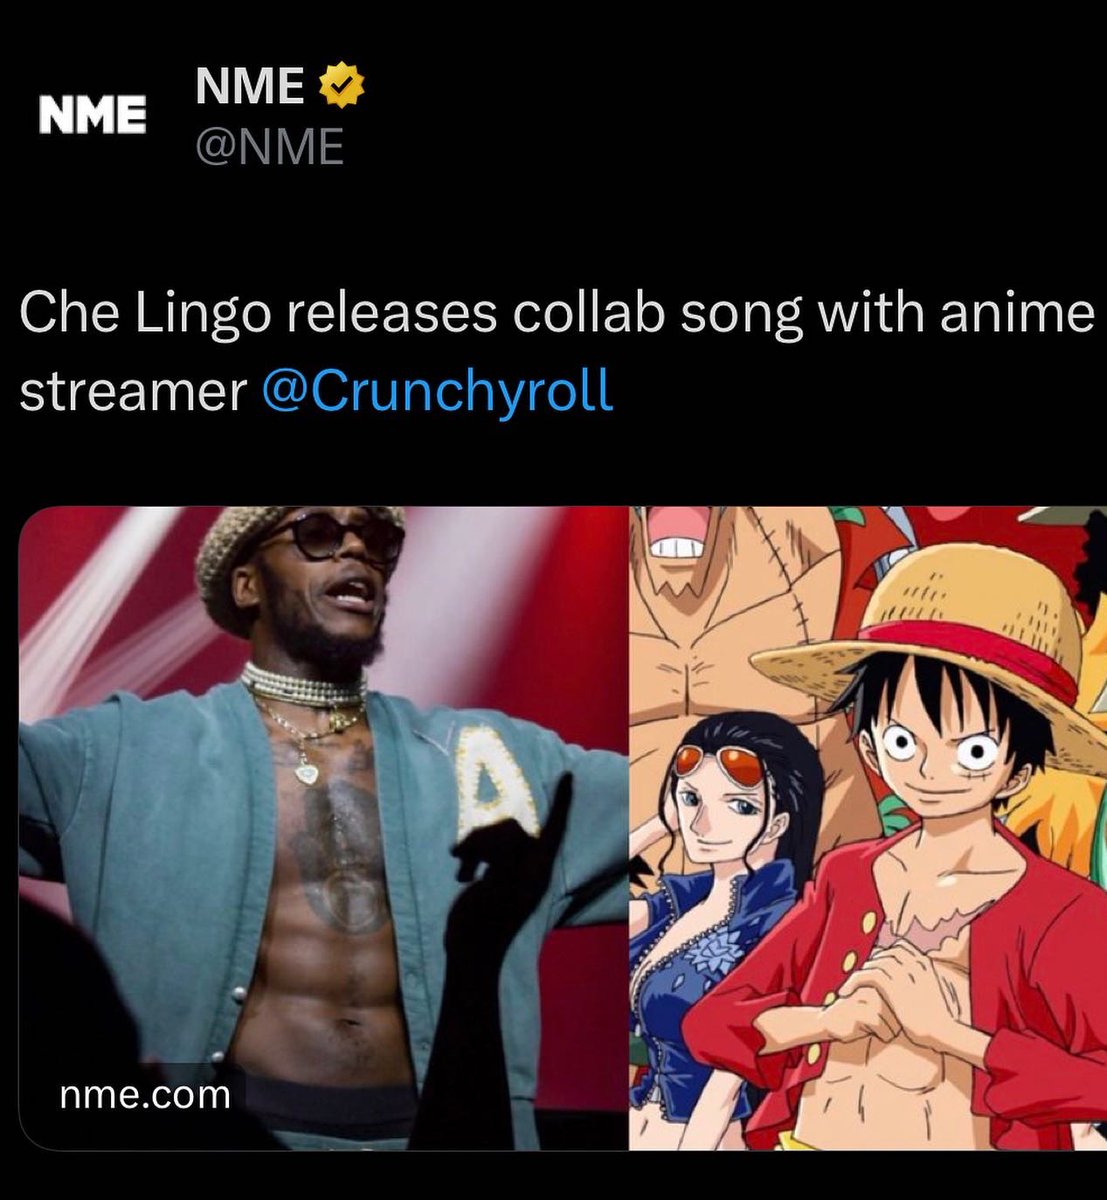 Che Lingo releases collab song with anime streamer Crunchyroll